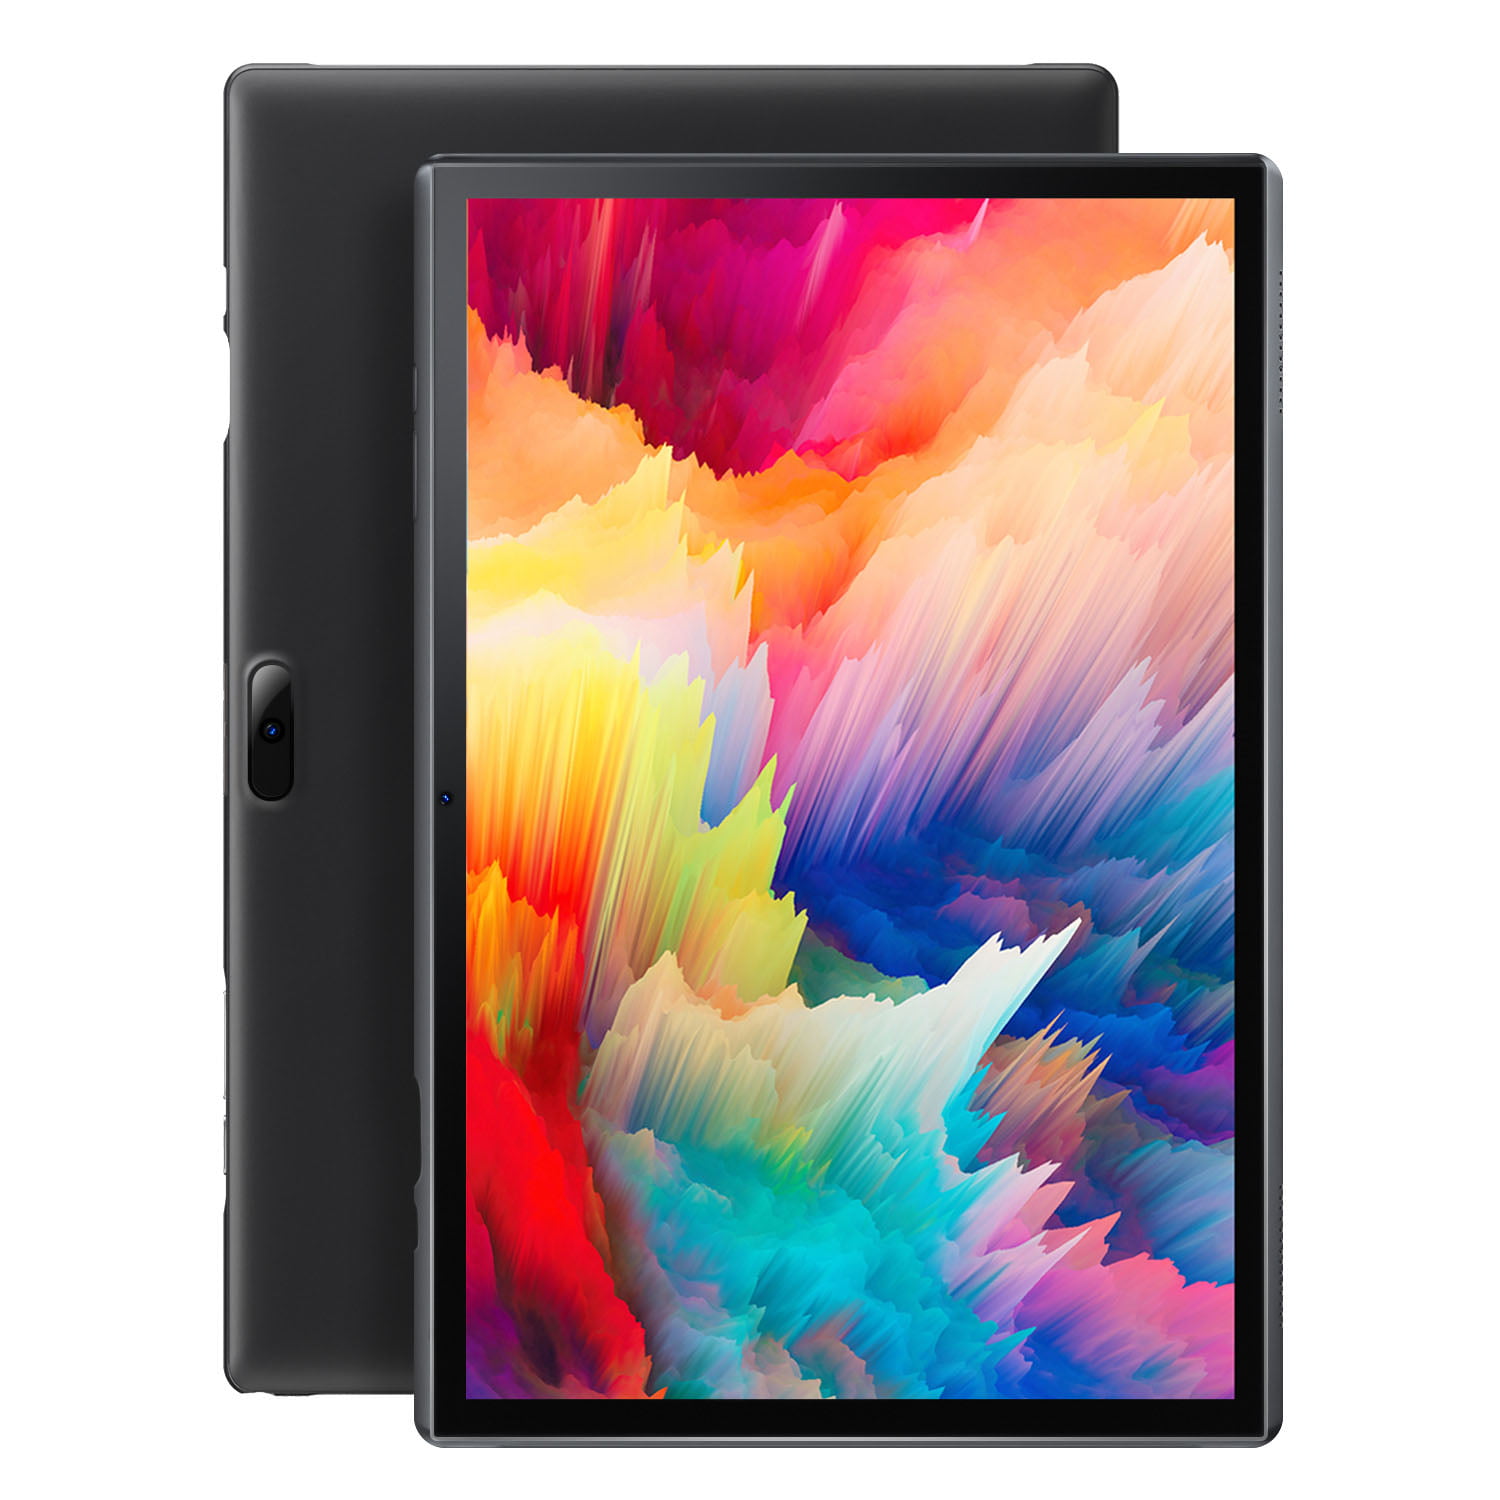 VANKYO MatrixPad S30 10 inch Tablet, Octa-Core, Come With Screen 